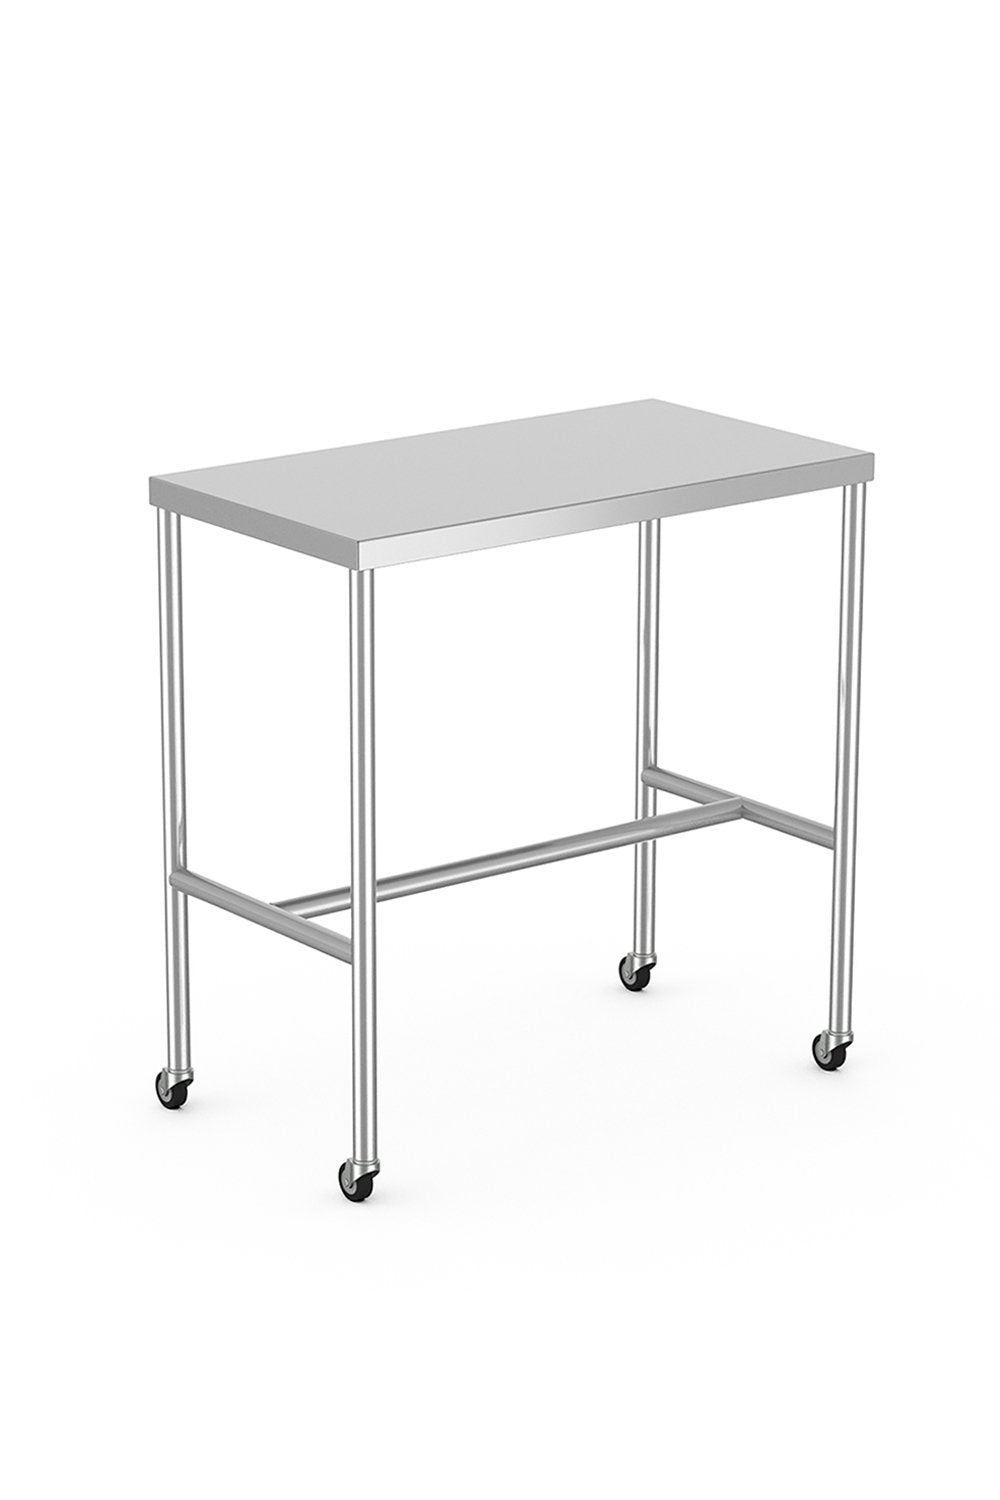 Stainless Steel Table Stainless Solutions Macmedical 18"D x 33"W x 34"H H-Brace 